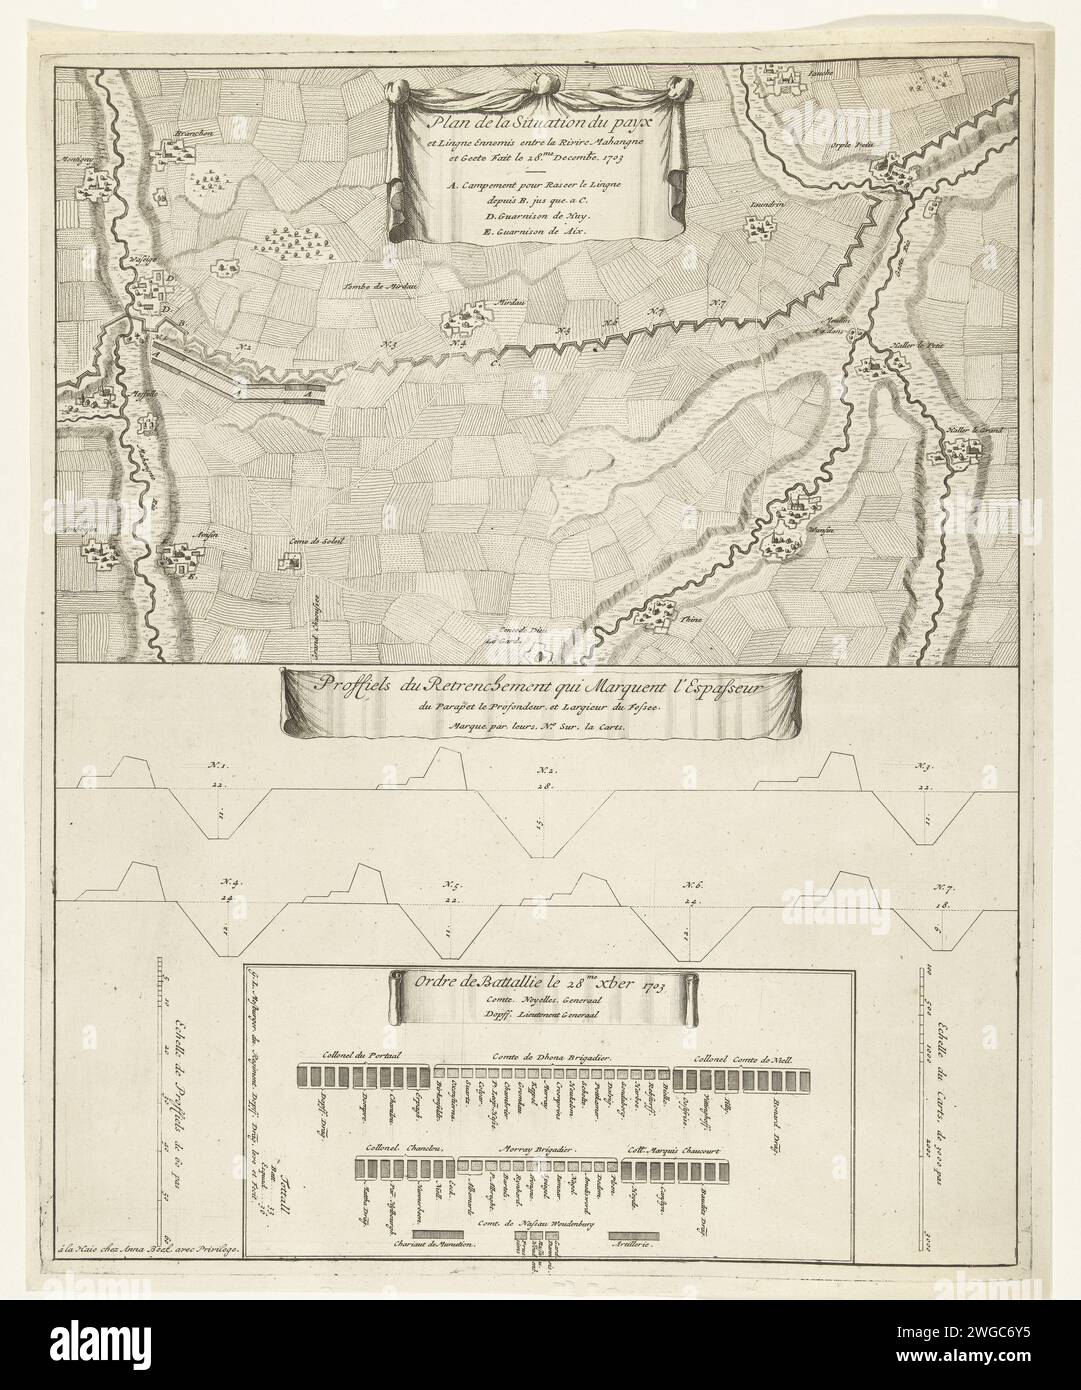 Map of the French Line in Brabant, 1703, 1703 - 1717 print Map of the French line in Brabant between the Mehaigne and Oude Gete rivers, December 28, 1703. Under the map two profiles, the first of the parapets and canals of the line and the second of the battle order of the Allies on December 28, 1703. The Hague paper etching / engraving maps of separate countries or regions. fortifications, military engineering Liège Stock Photo